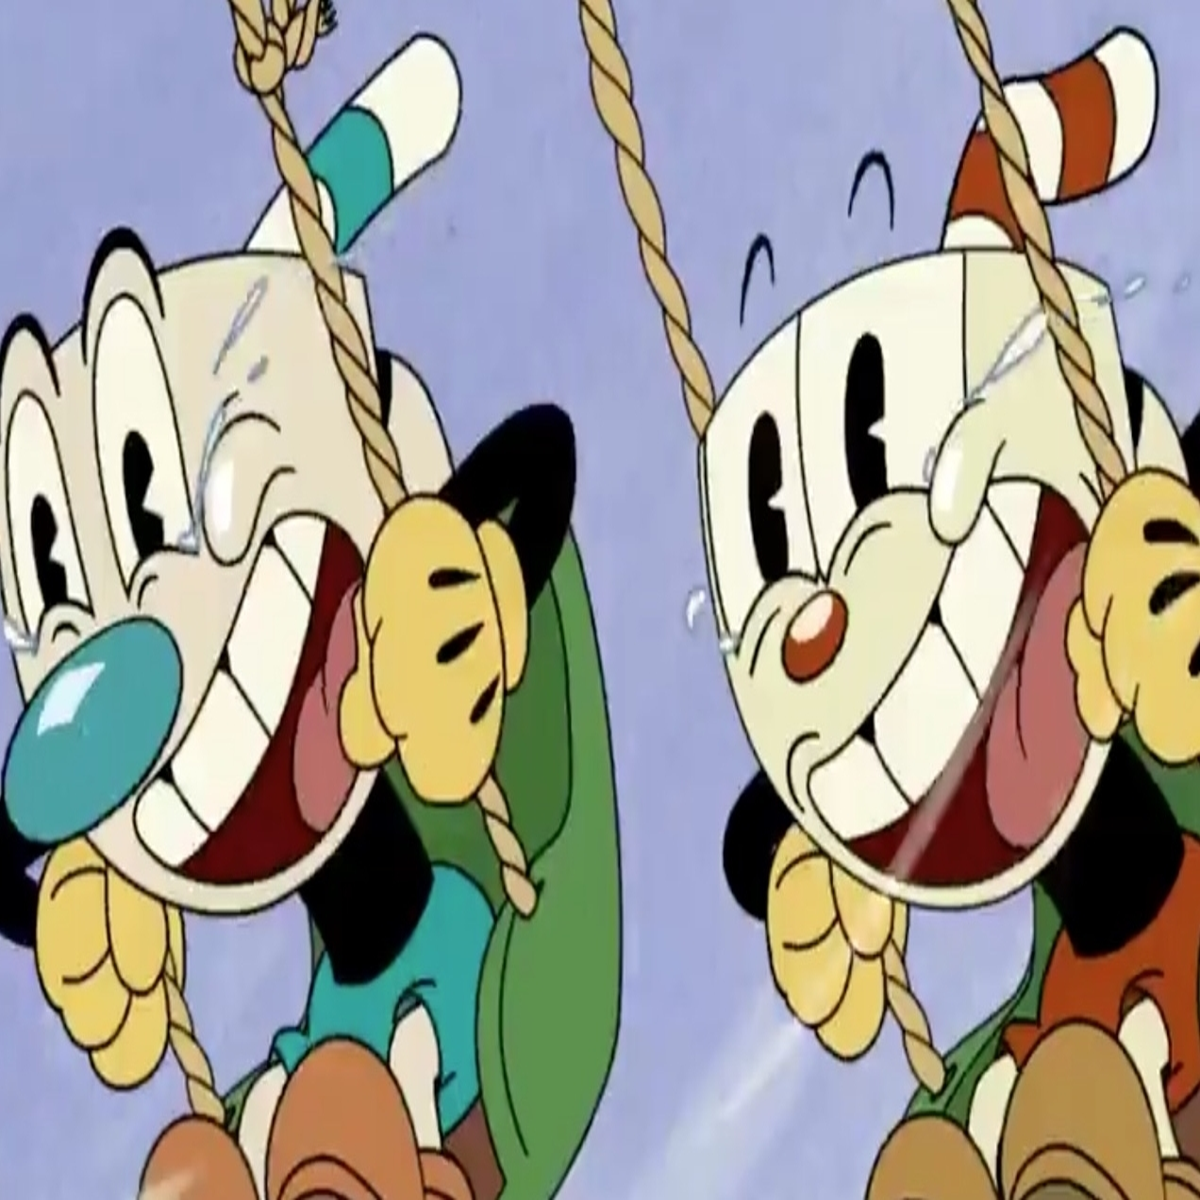 The Cuphead Show!' Trailer; Netflix Debut Date Revealed